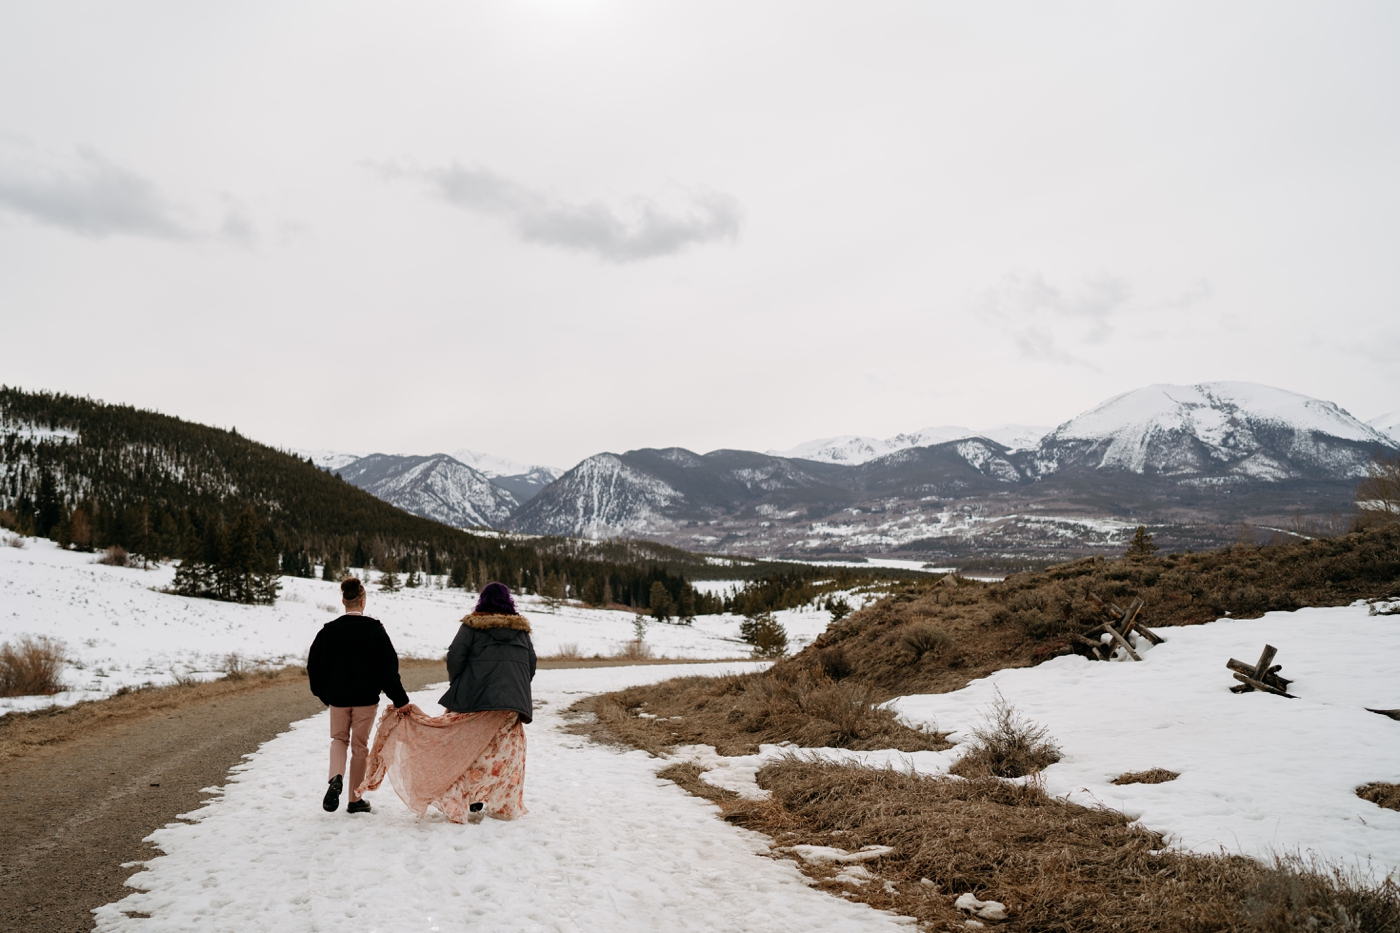 Adventure session in the mountains of Breckenridge, CO